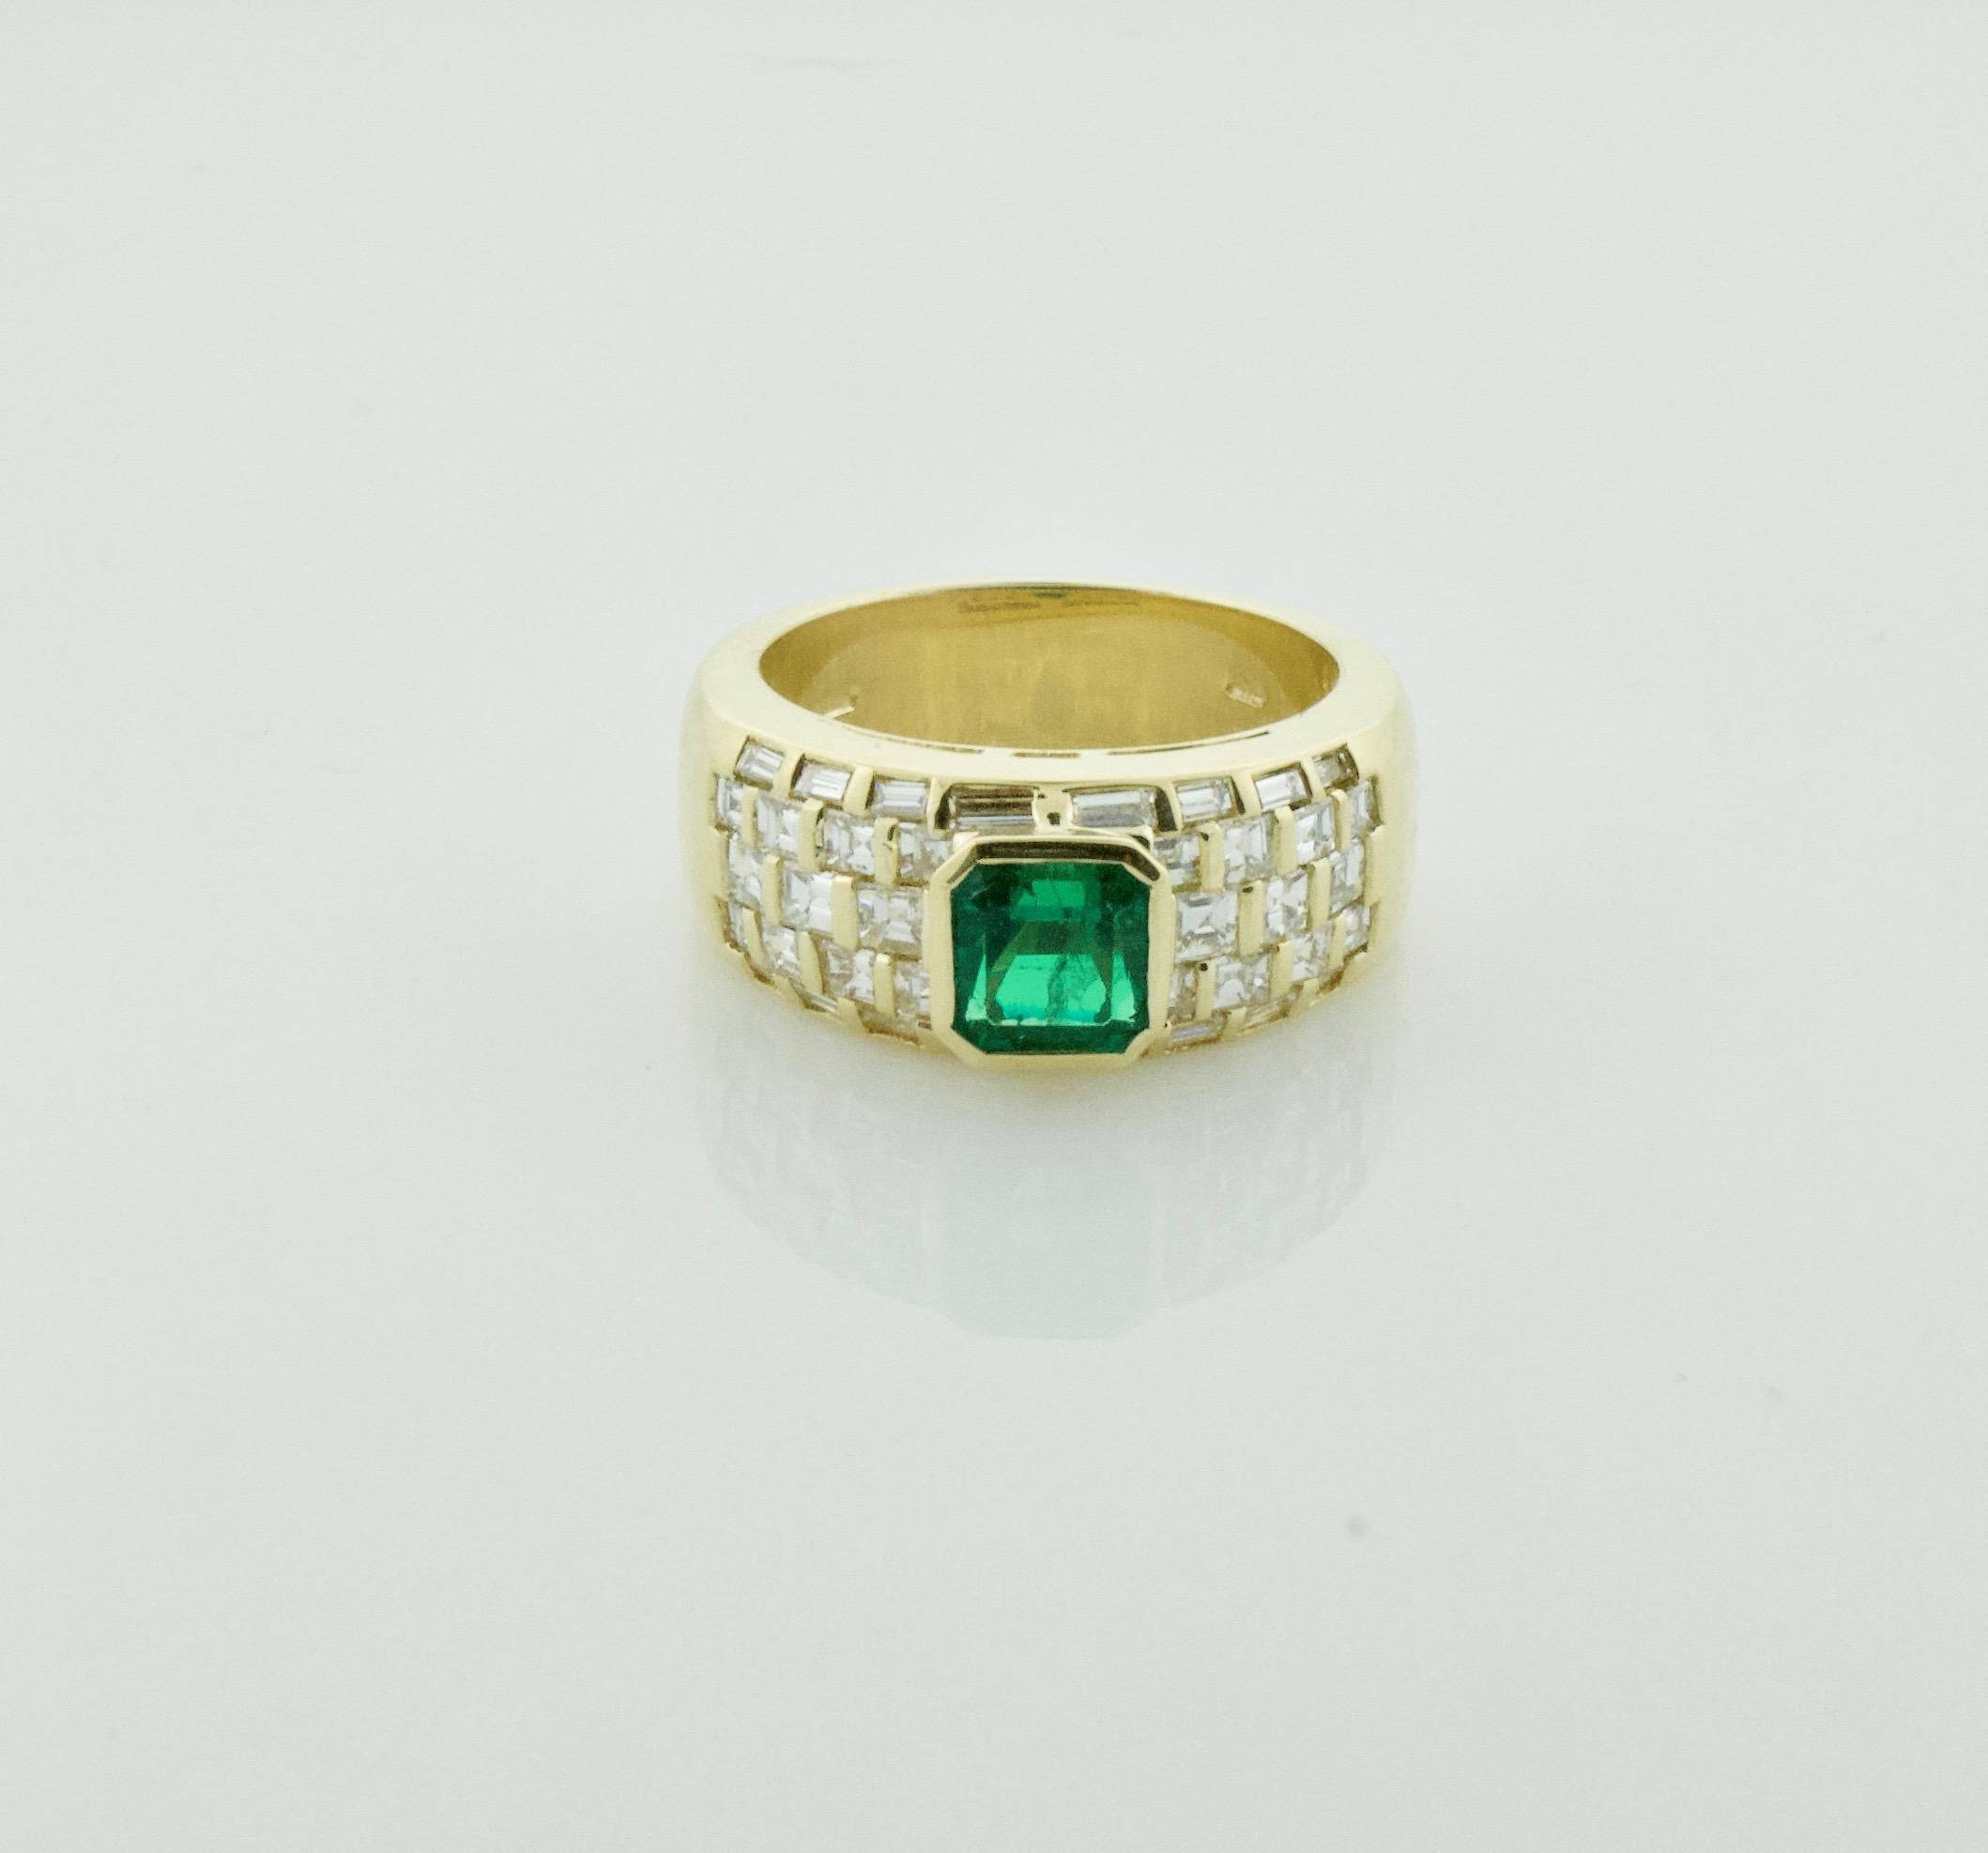 Vibrant Emerald and Diamond Ring in 18k Yellow Gold
One Square Cut Emerald Weighing 1.15 Carats Approximately [bright with no imperfections visible to the naked eye]
Thirty Eight  Baguette and Square Cut Diamonds Weighing 1.00 Carats Approximately